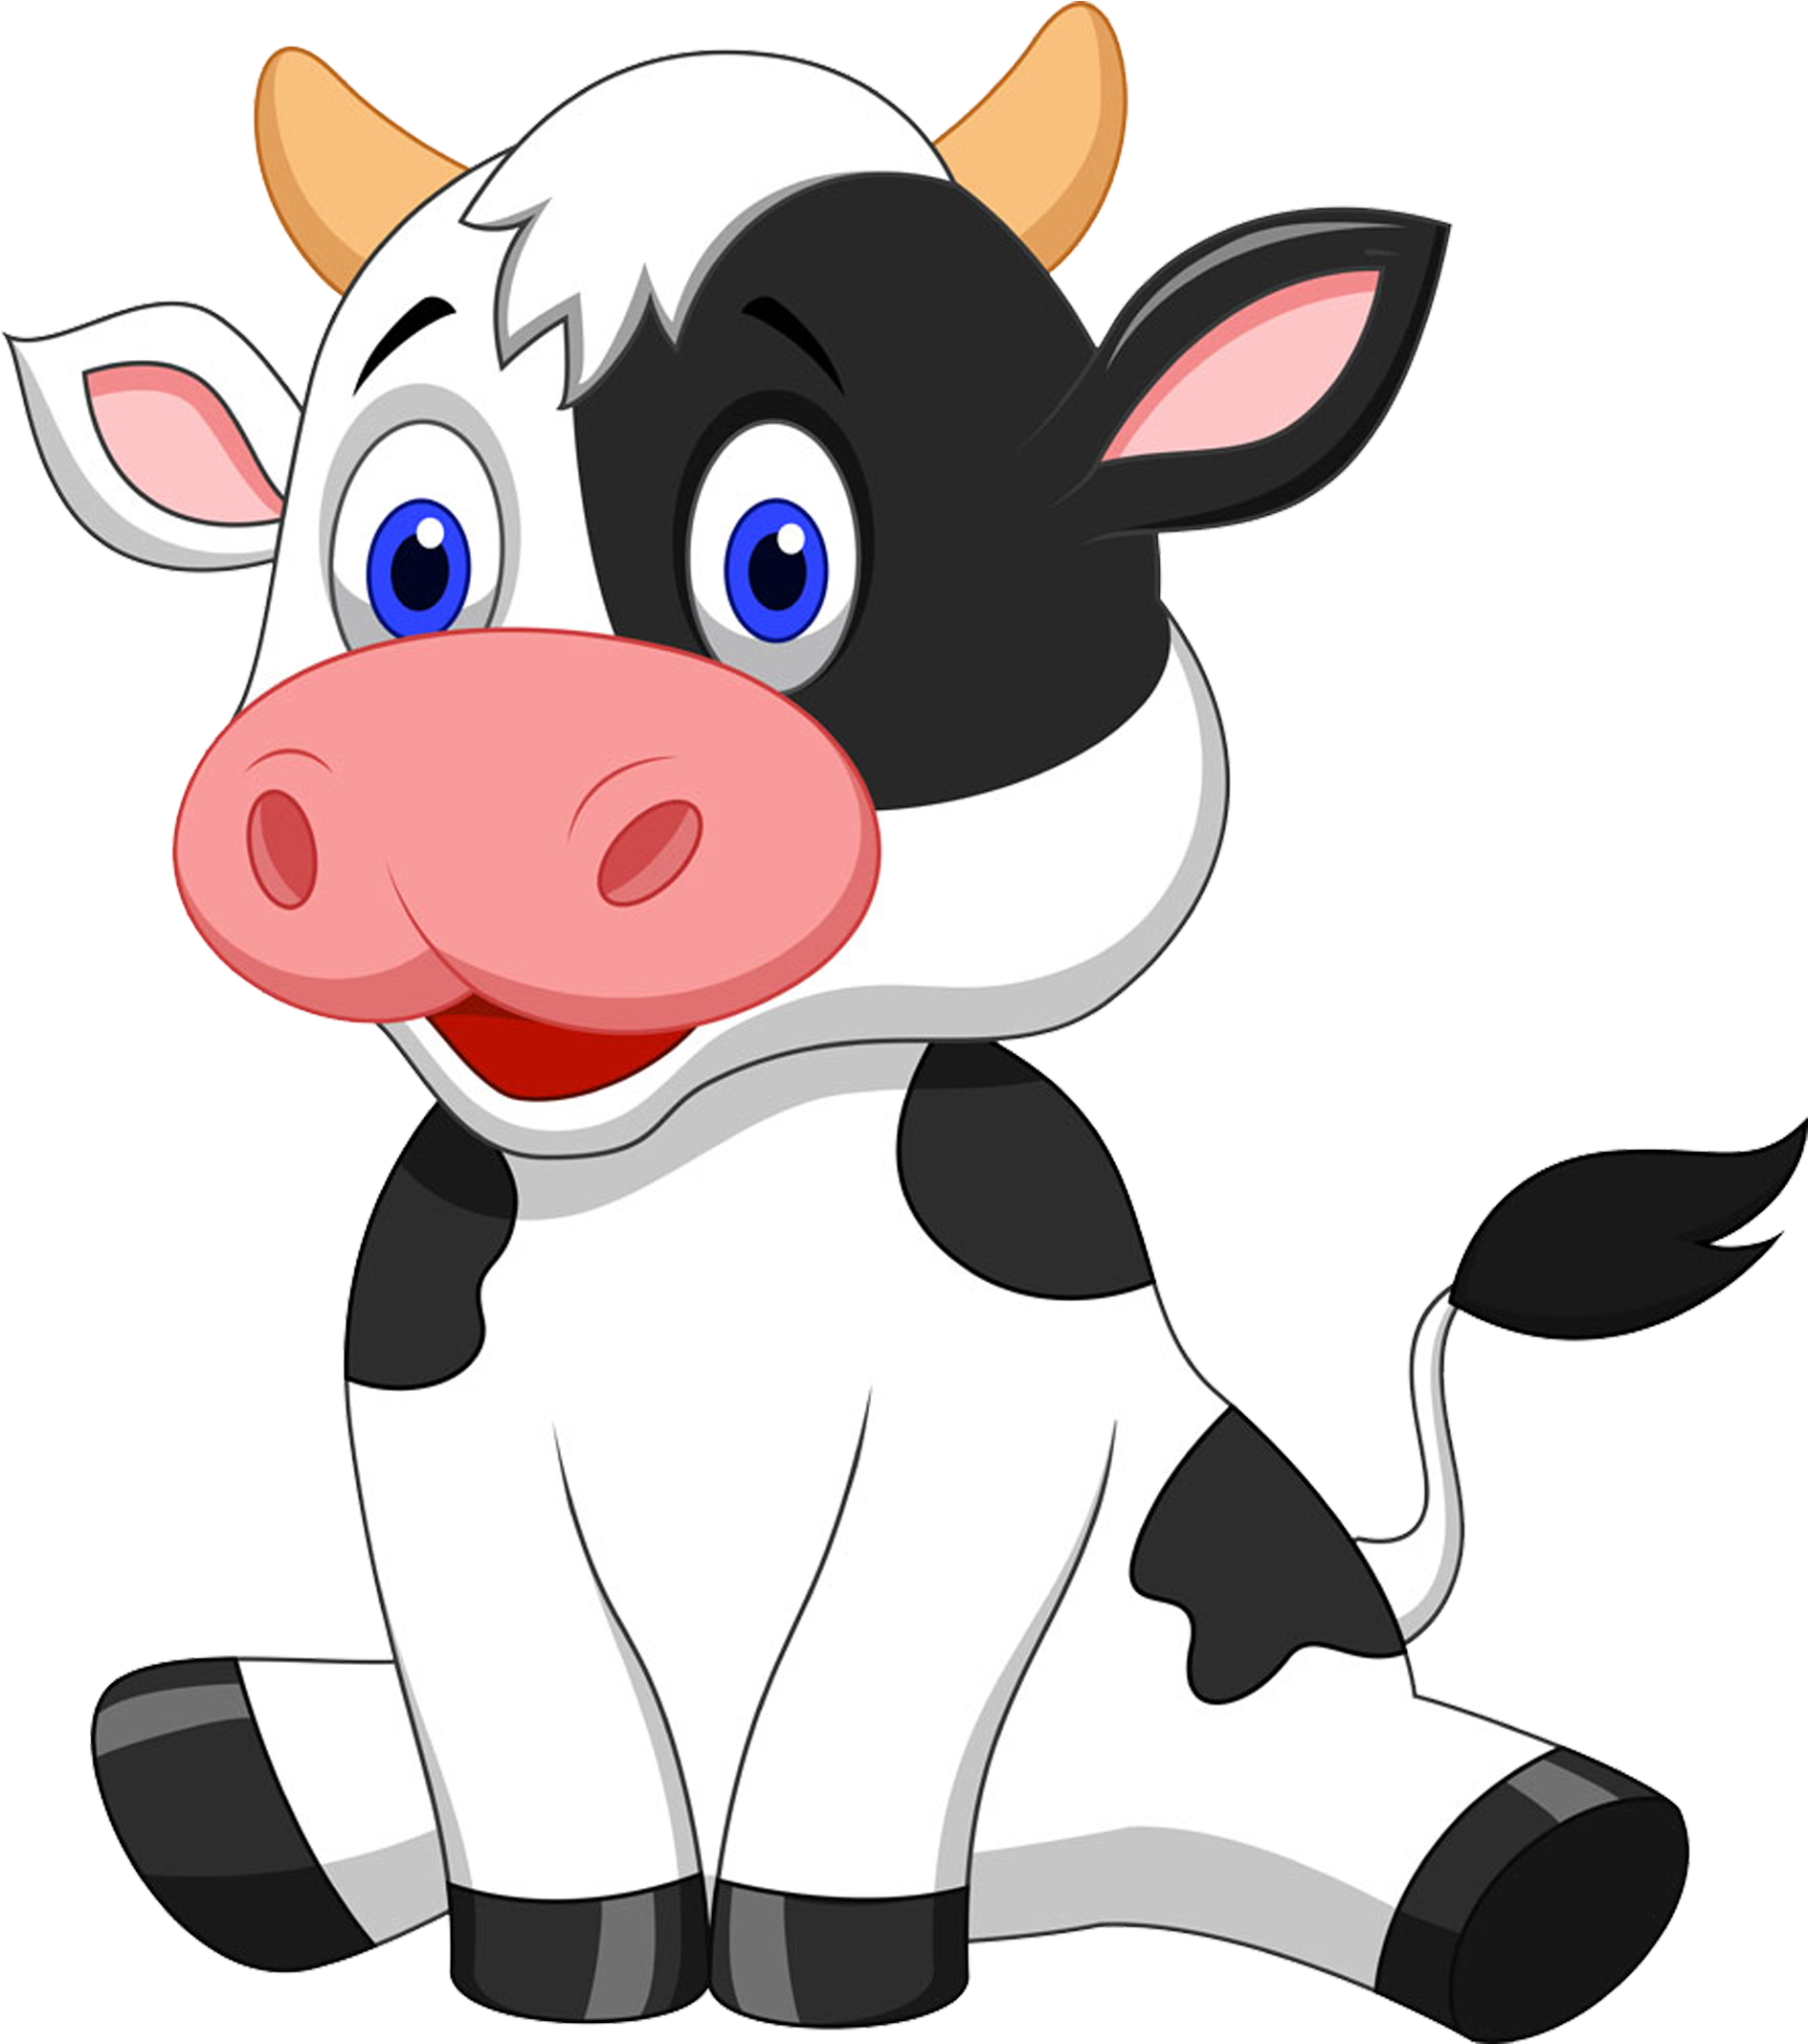 Cow PNG Image Background